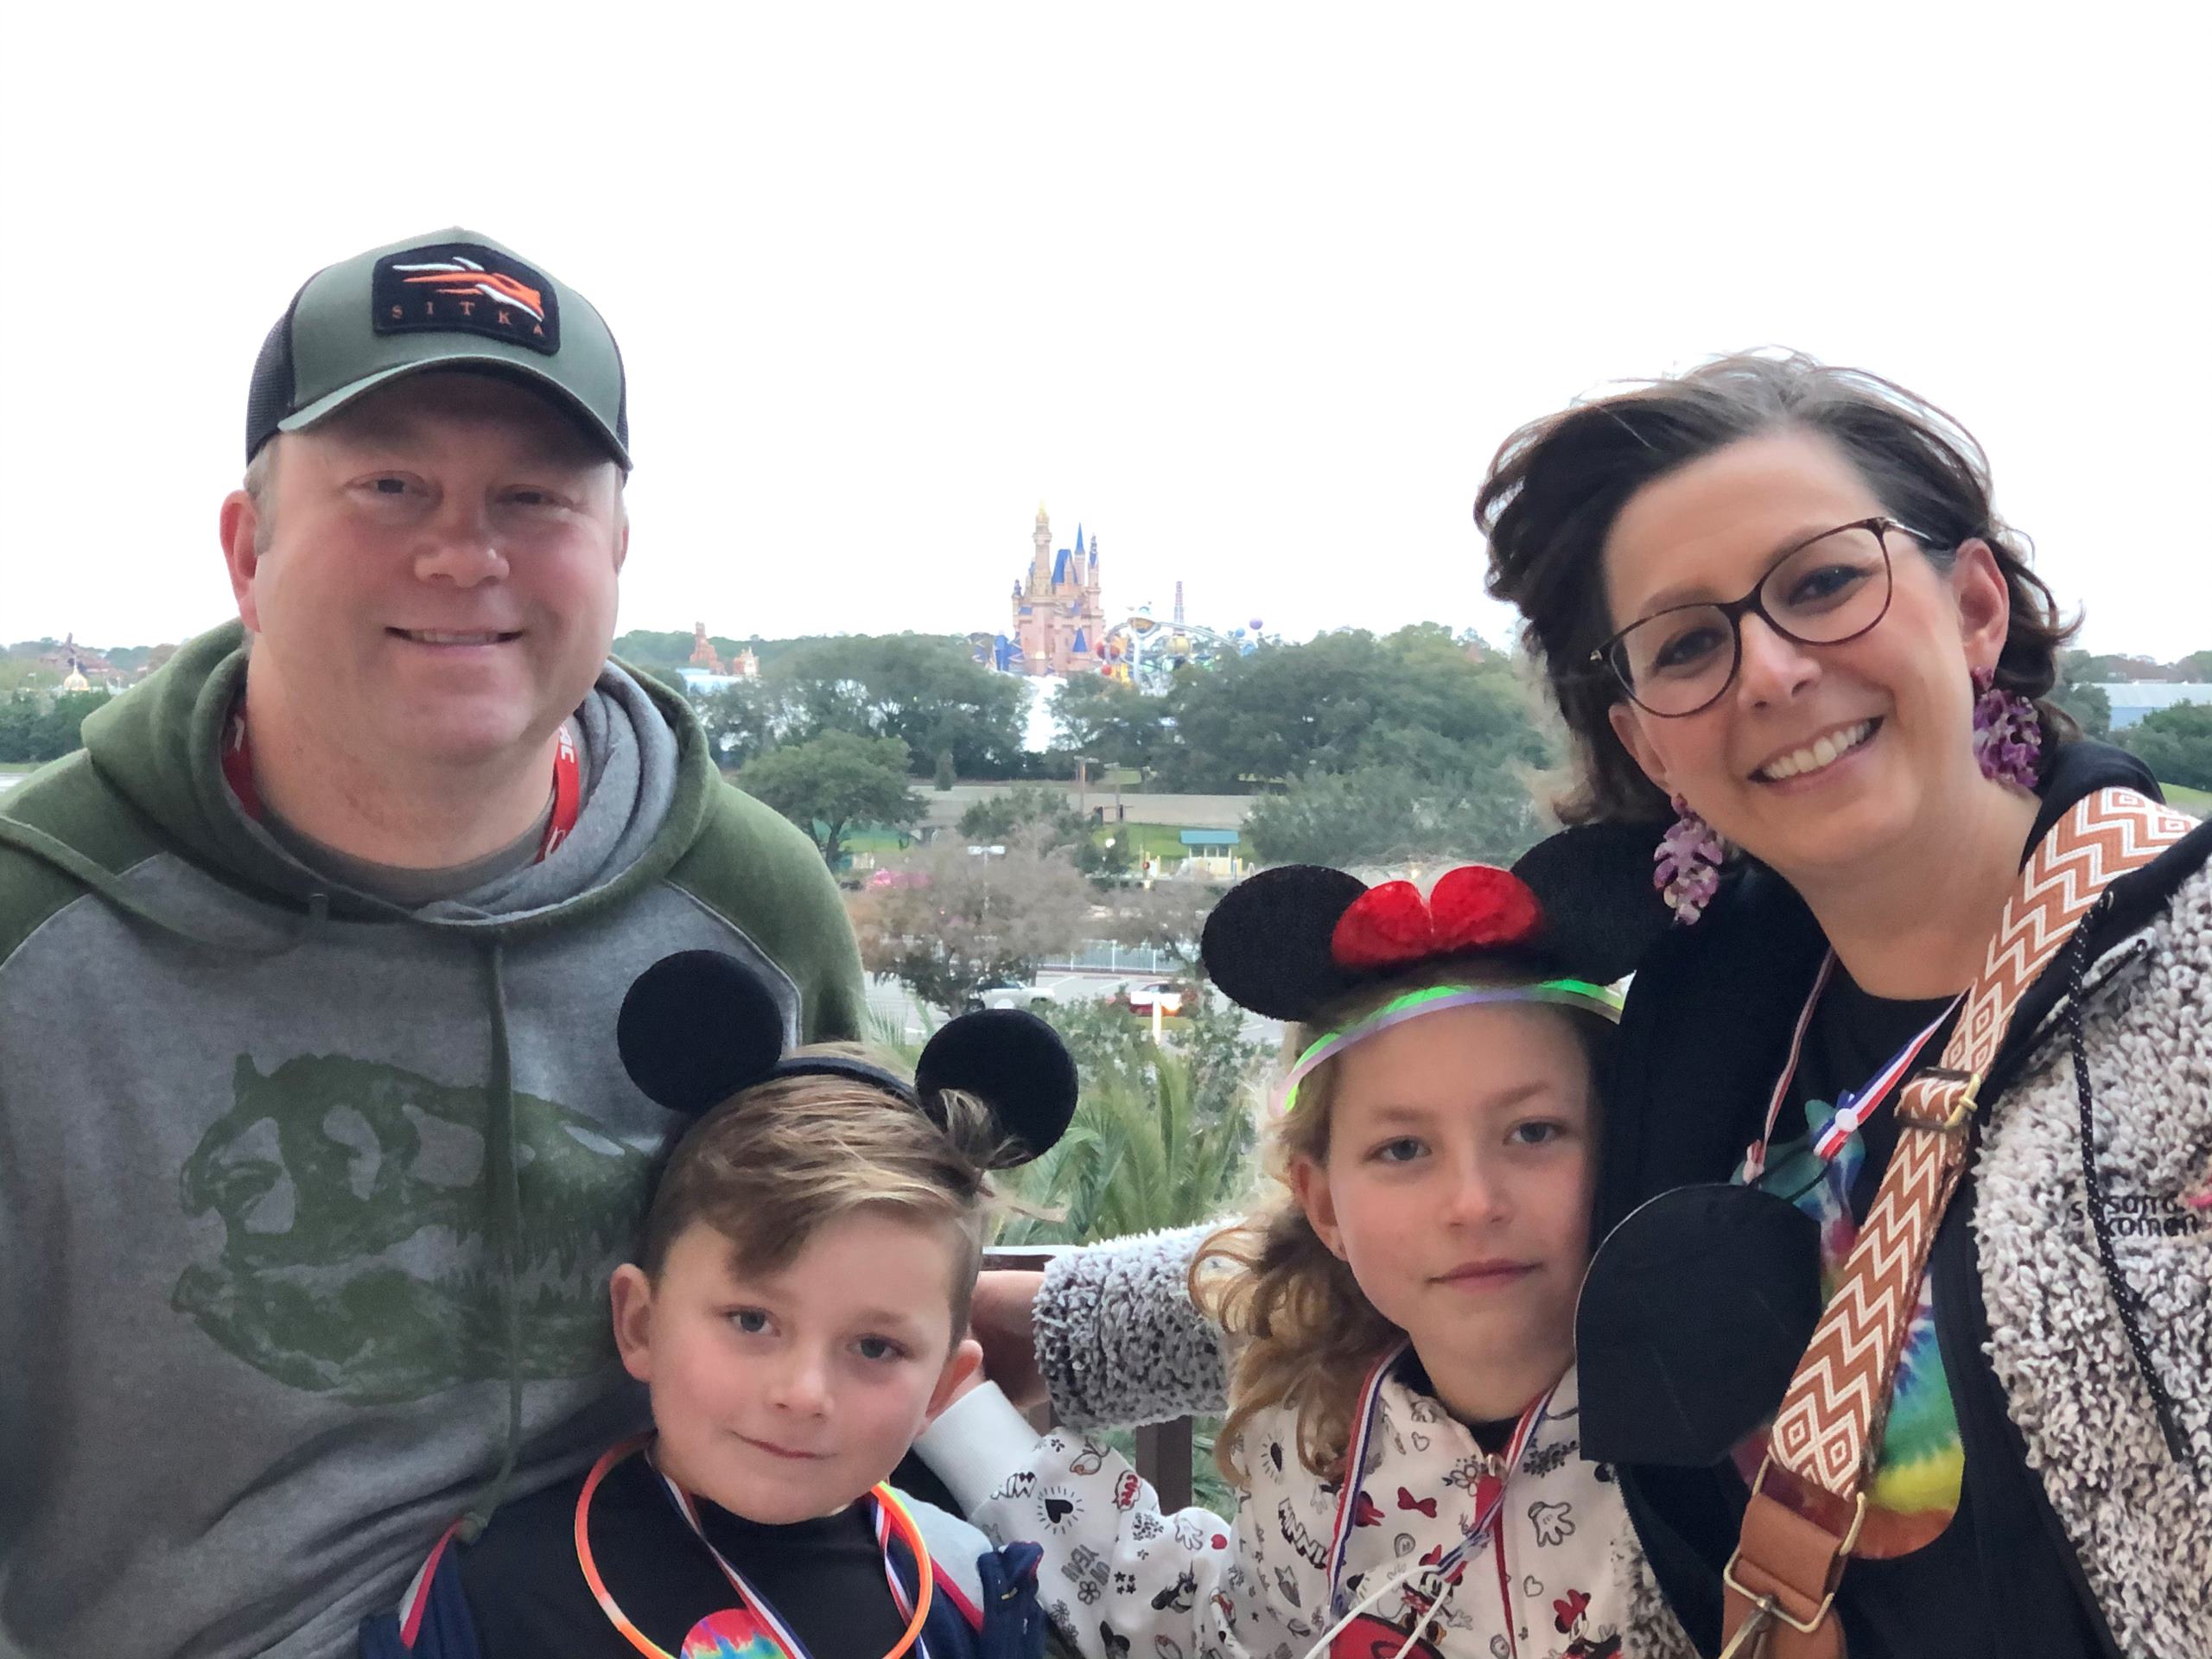 Janel Landis and her family on their visit to Disney World.